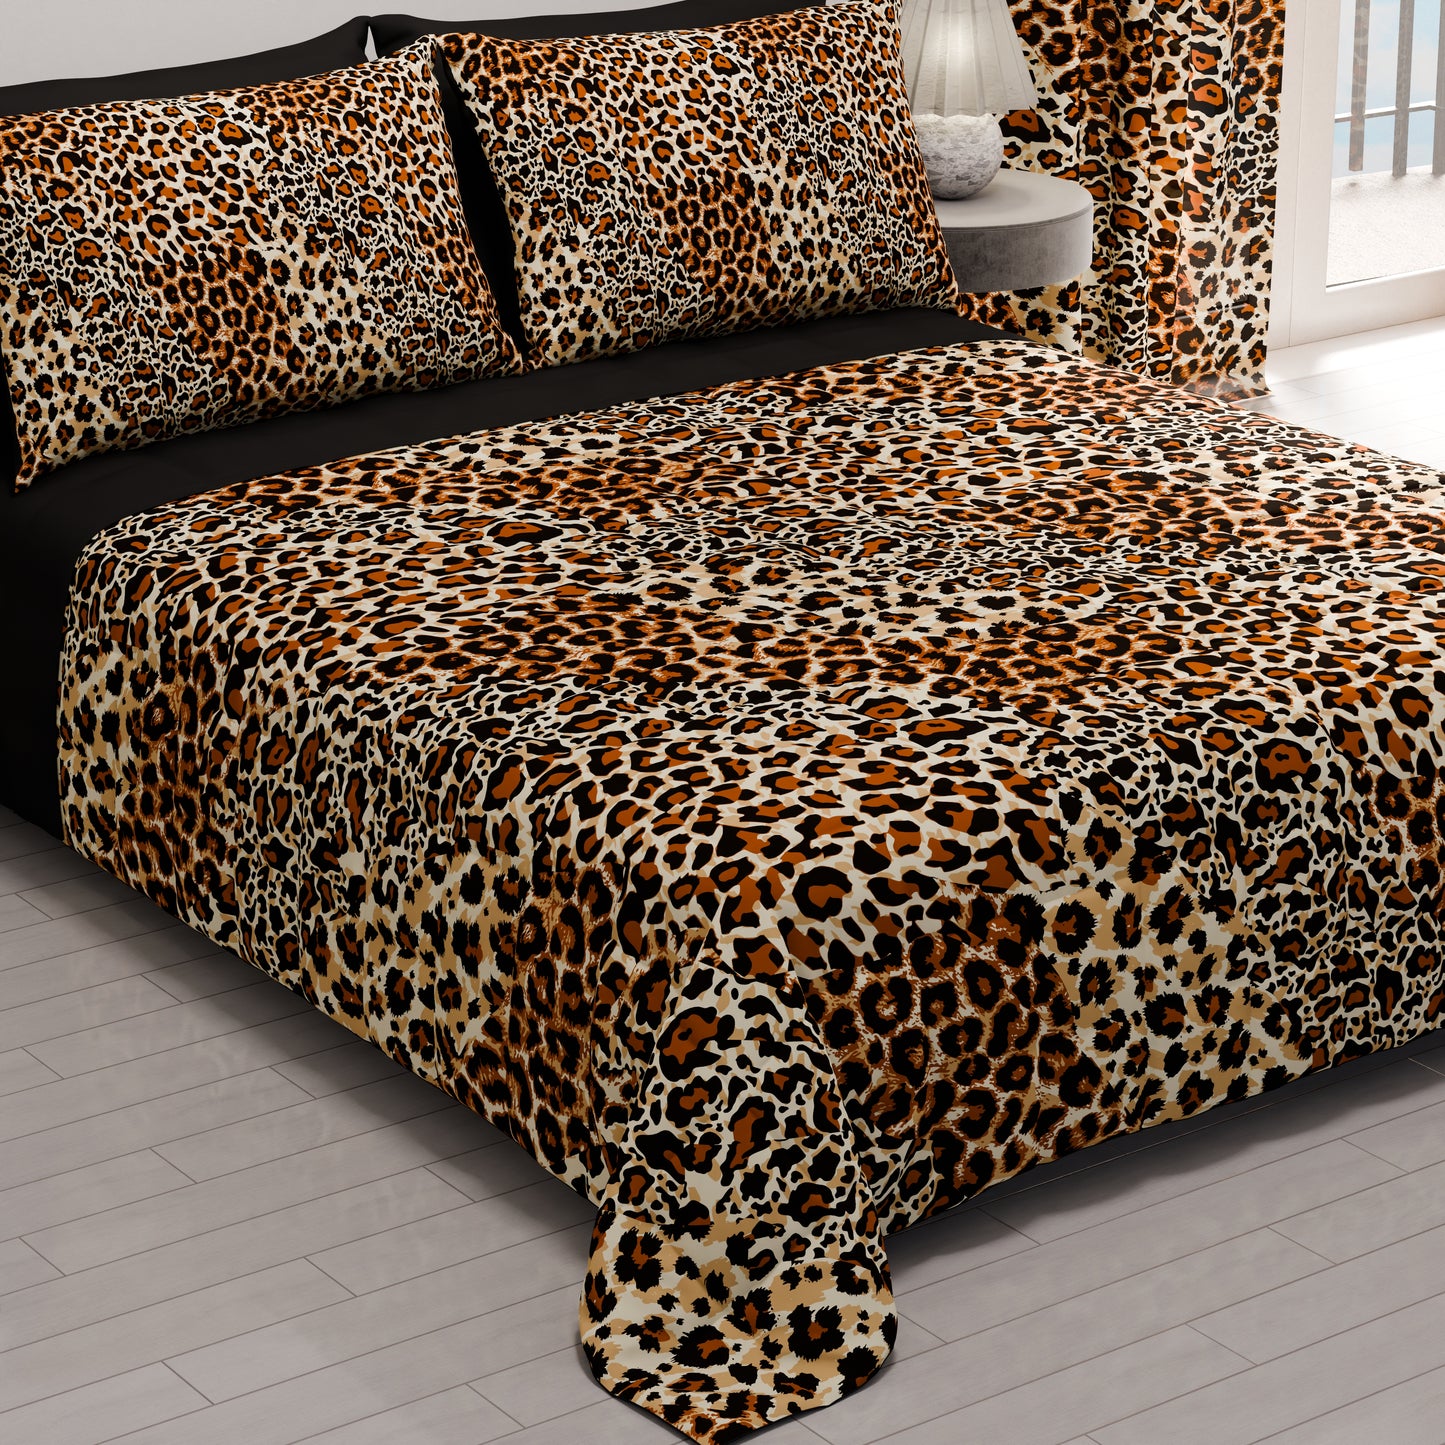 Spring Autumn Bedspread Quilt in Spotted Animal Digital Print